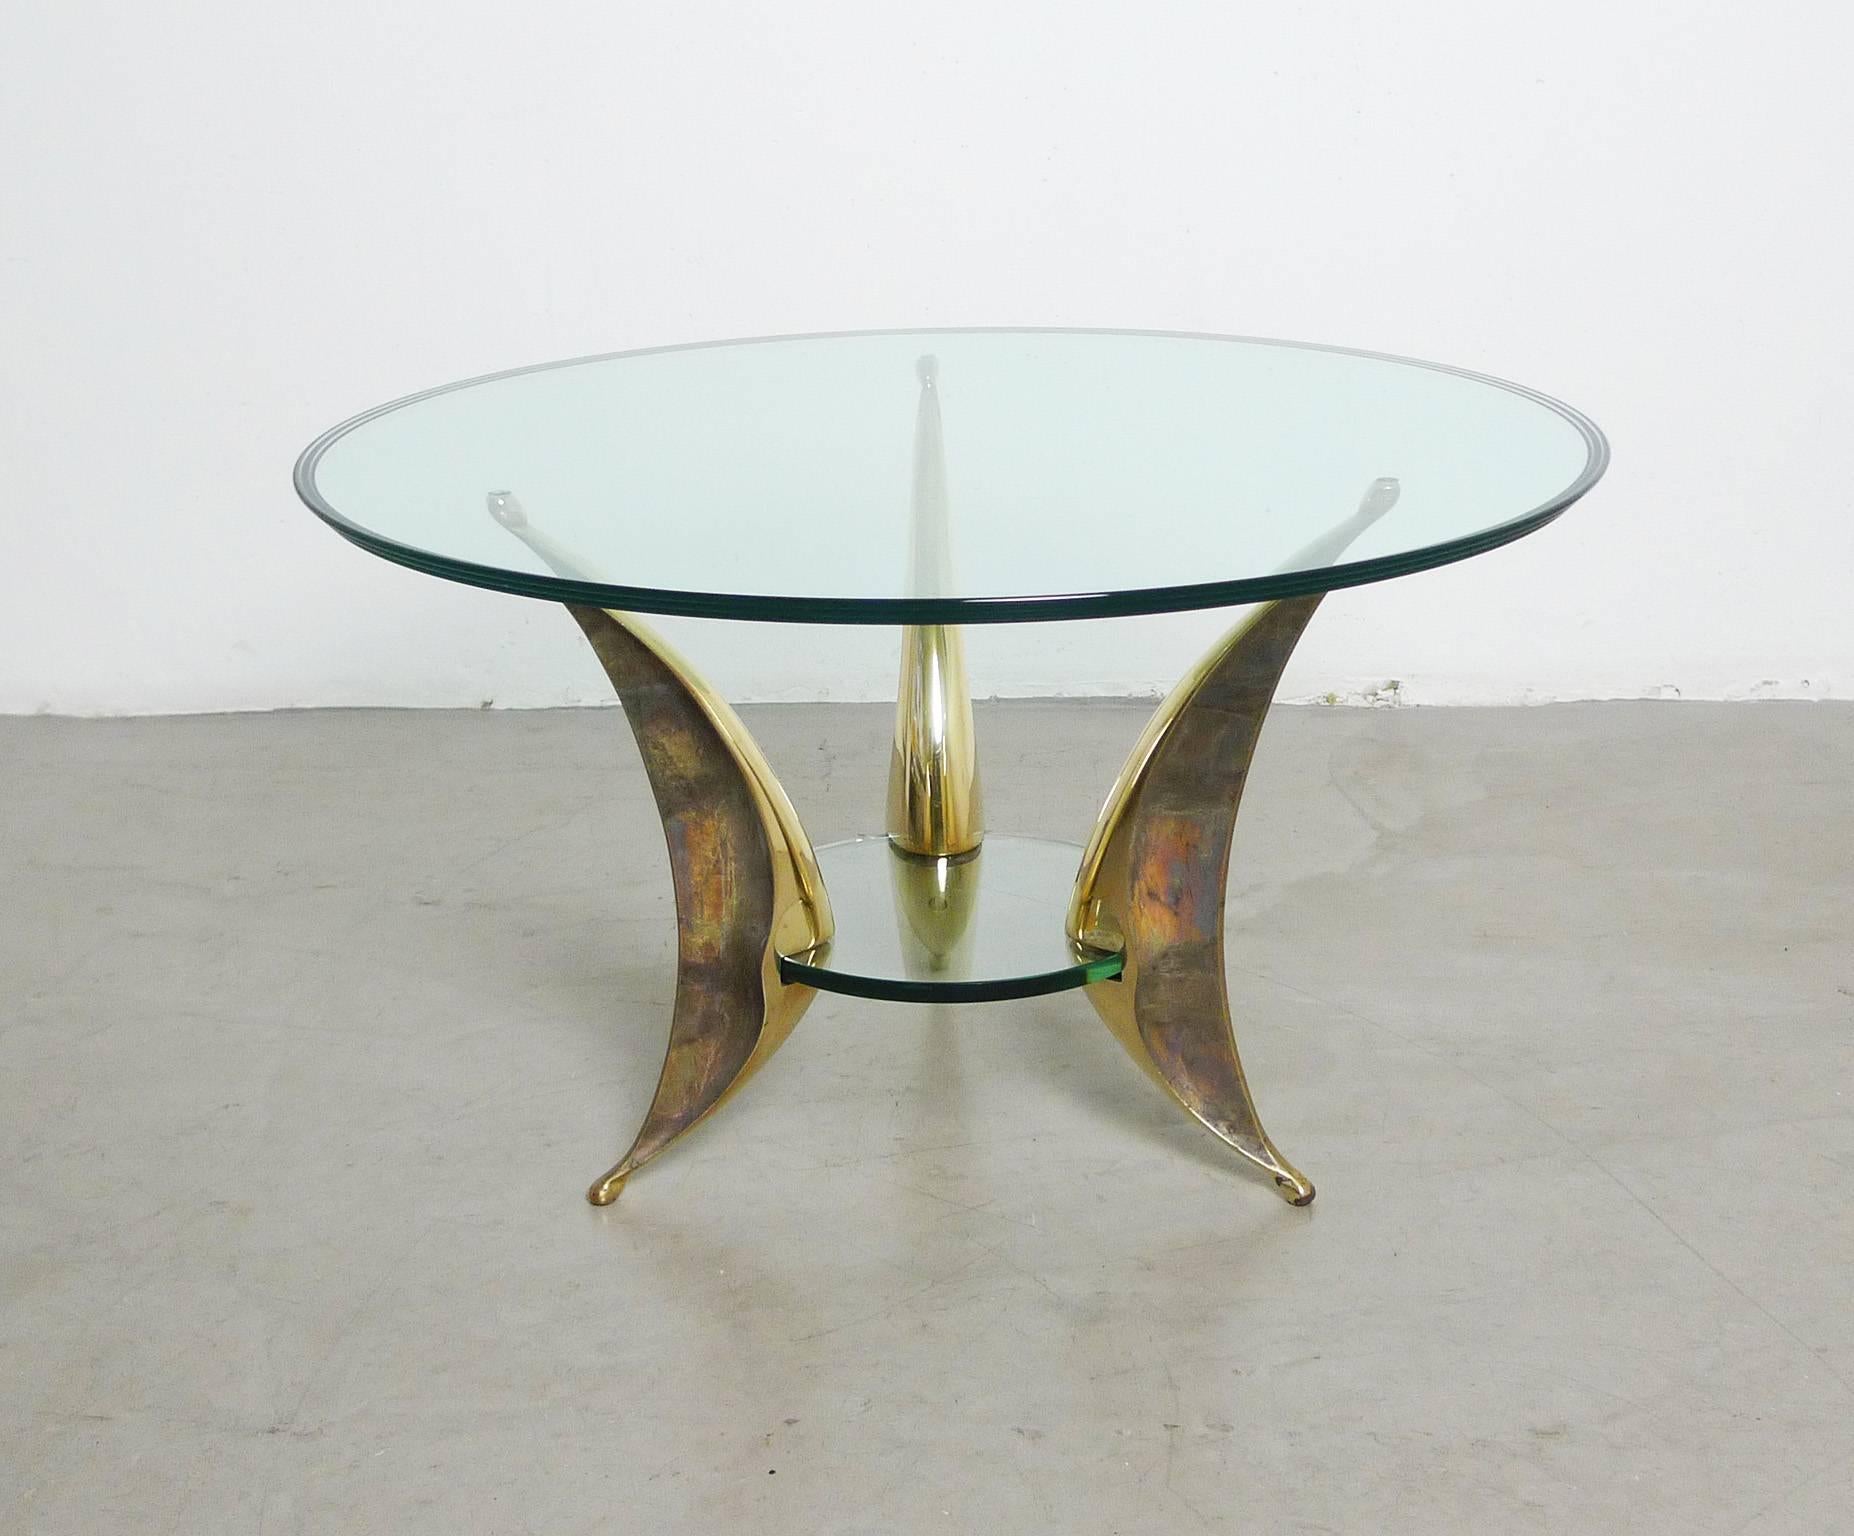 20th Century Sculptural Coffee Table with Massive Brass Feet and Two Glass Plates from Italy For Sale